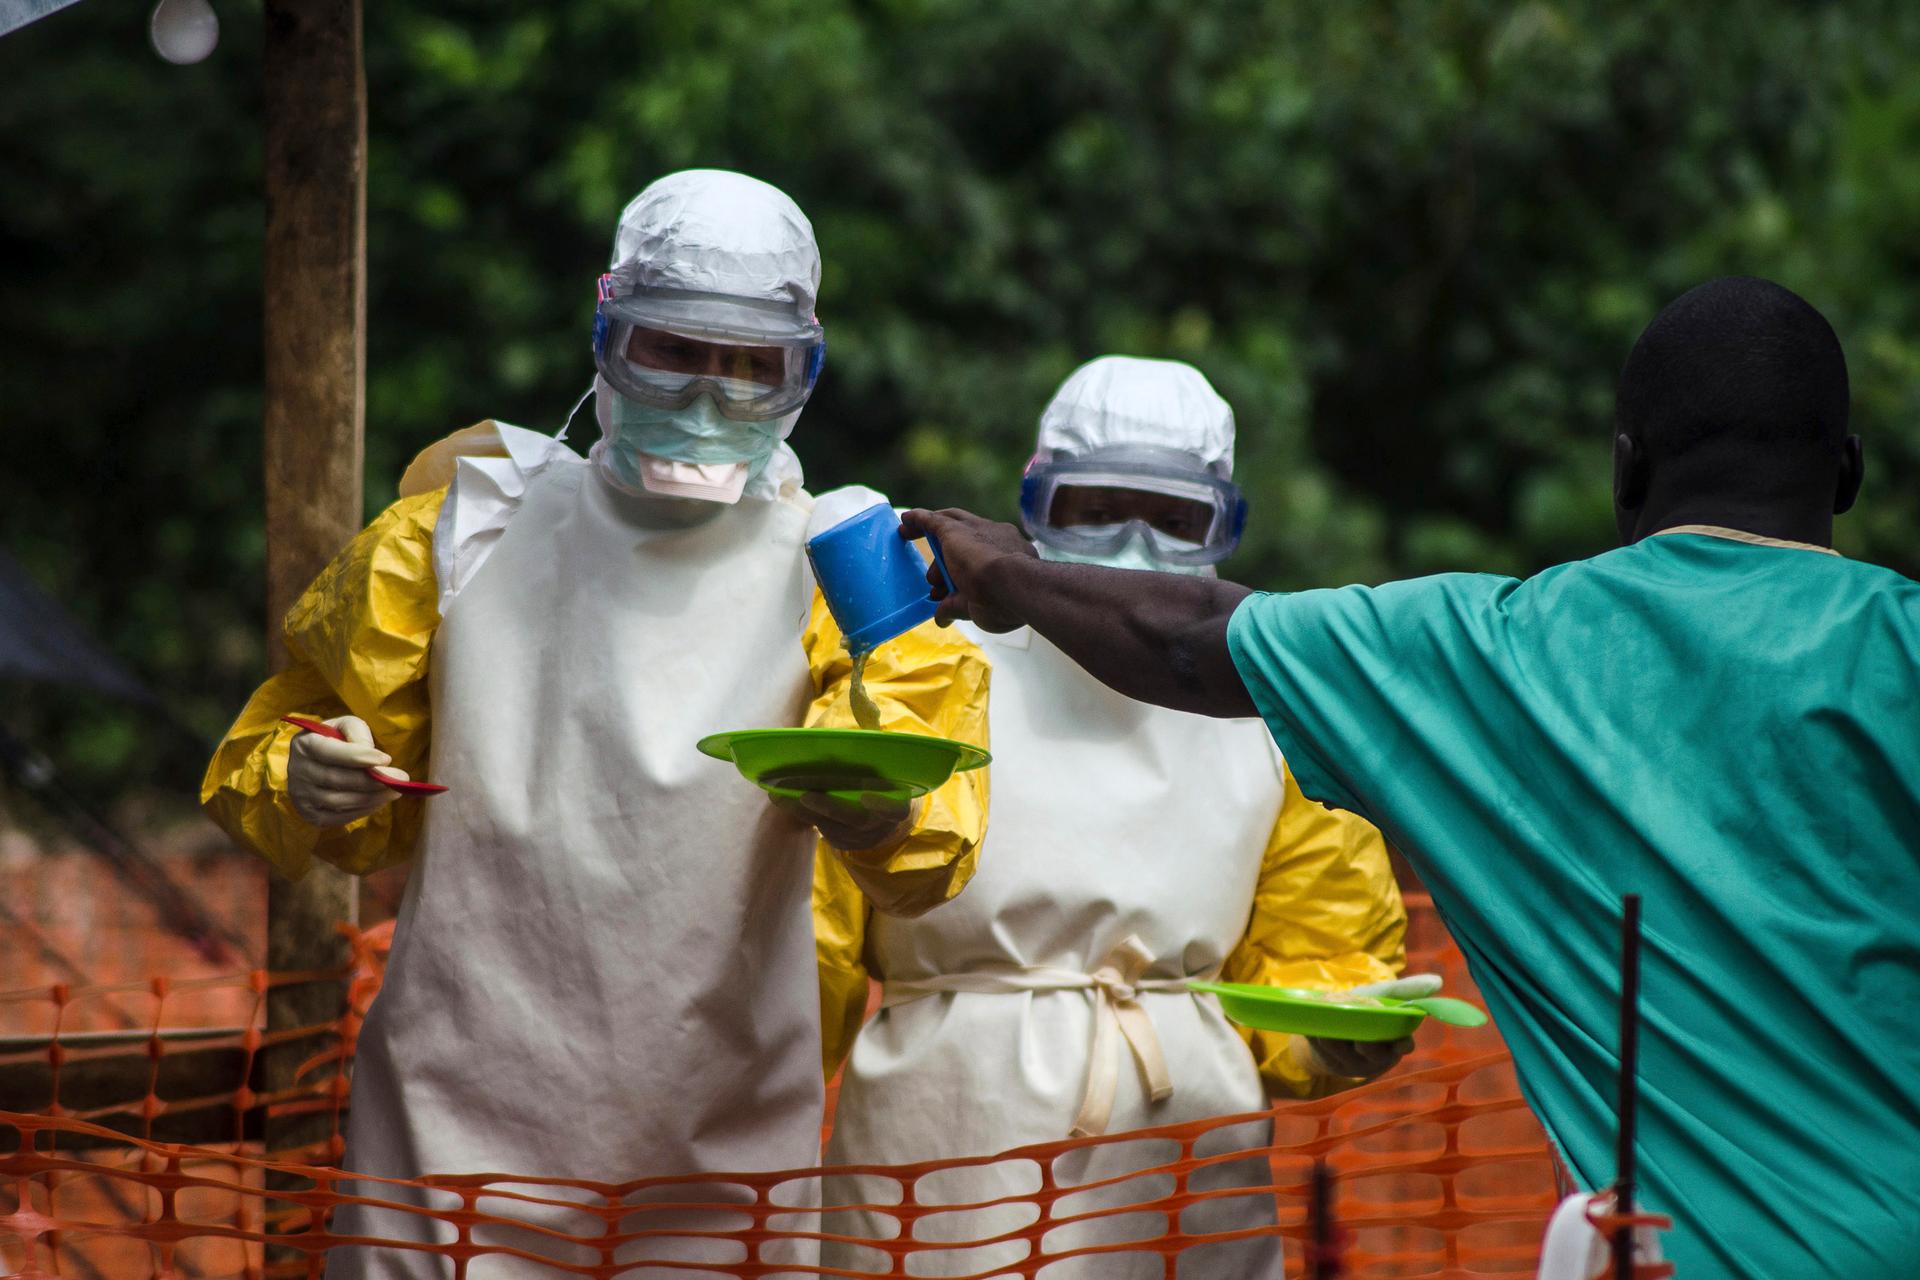 Medical staff working with Medecins sans Frontieres (MSF) prepare to bring food to patients kept in an isolation area at the MSF Ebola treatment centre in Kailahun July 20, 2014.